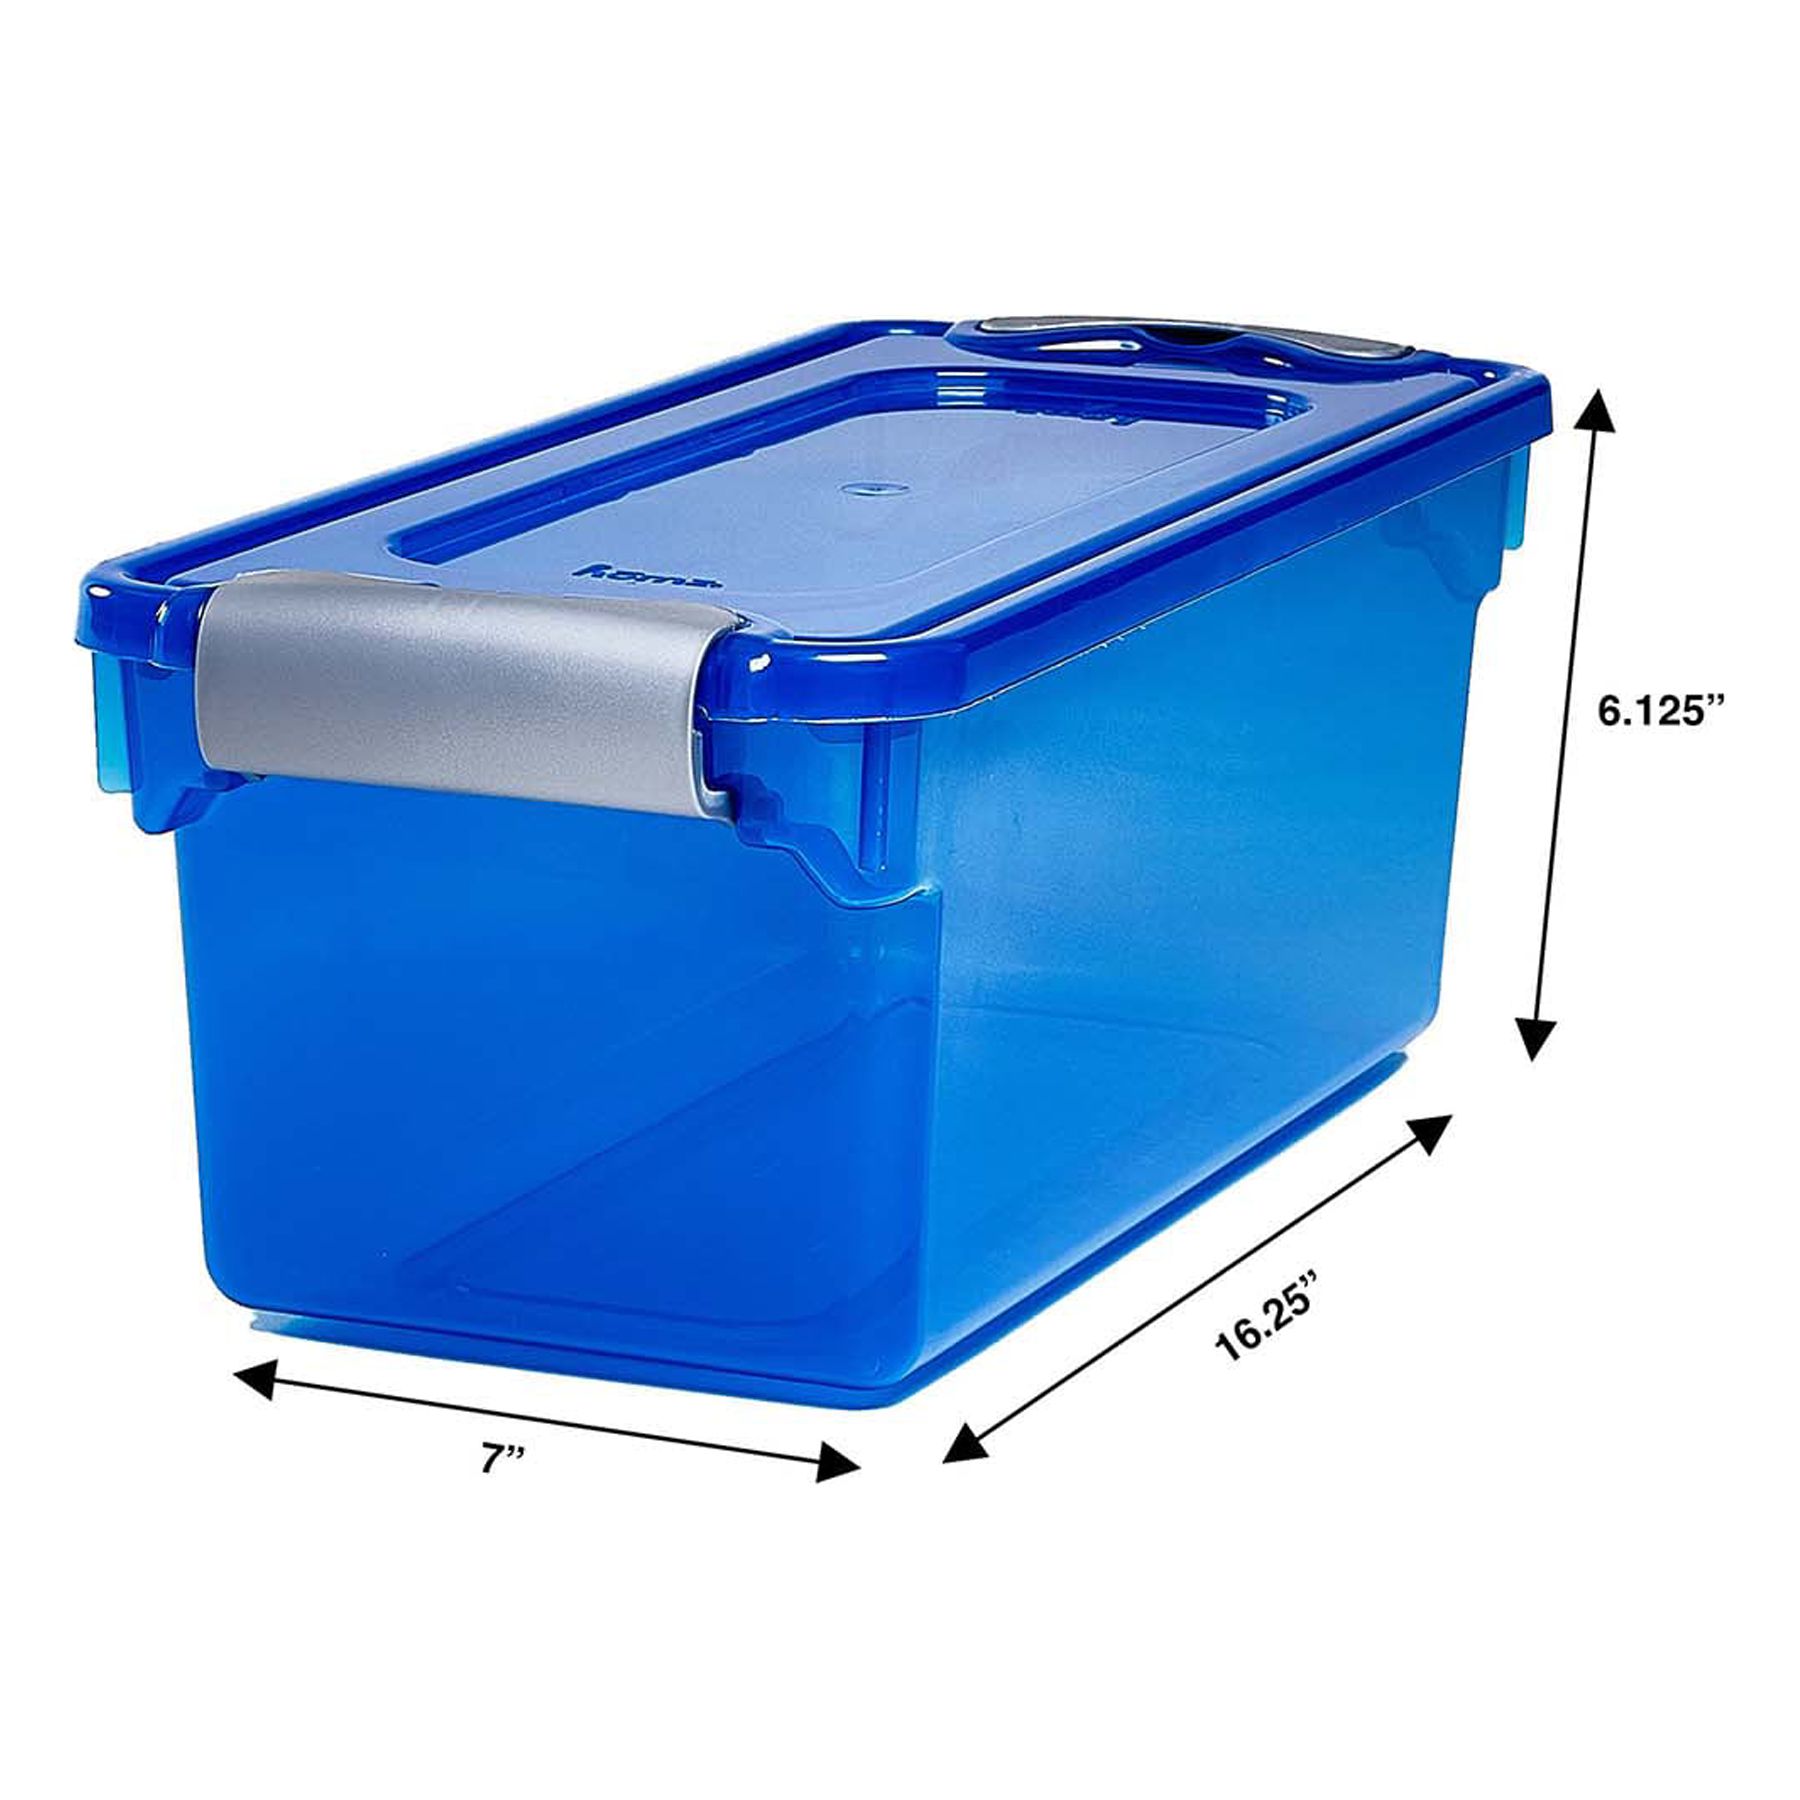 Homz 1.8 Gallon Plastic Storage Container, Blue and Clear - image 2 of 5